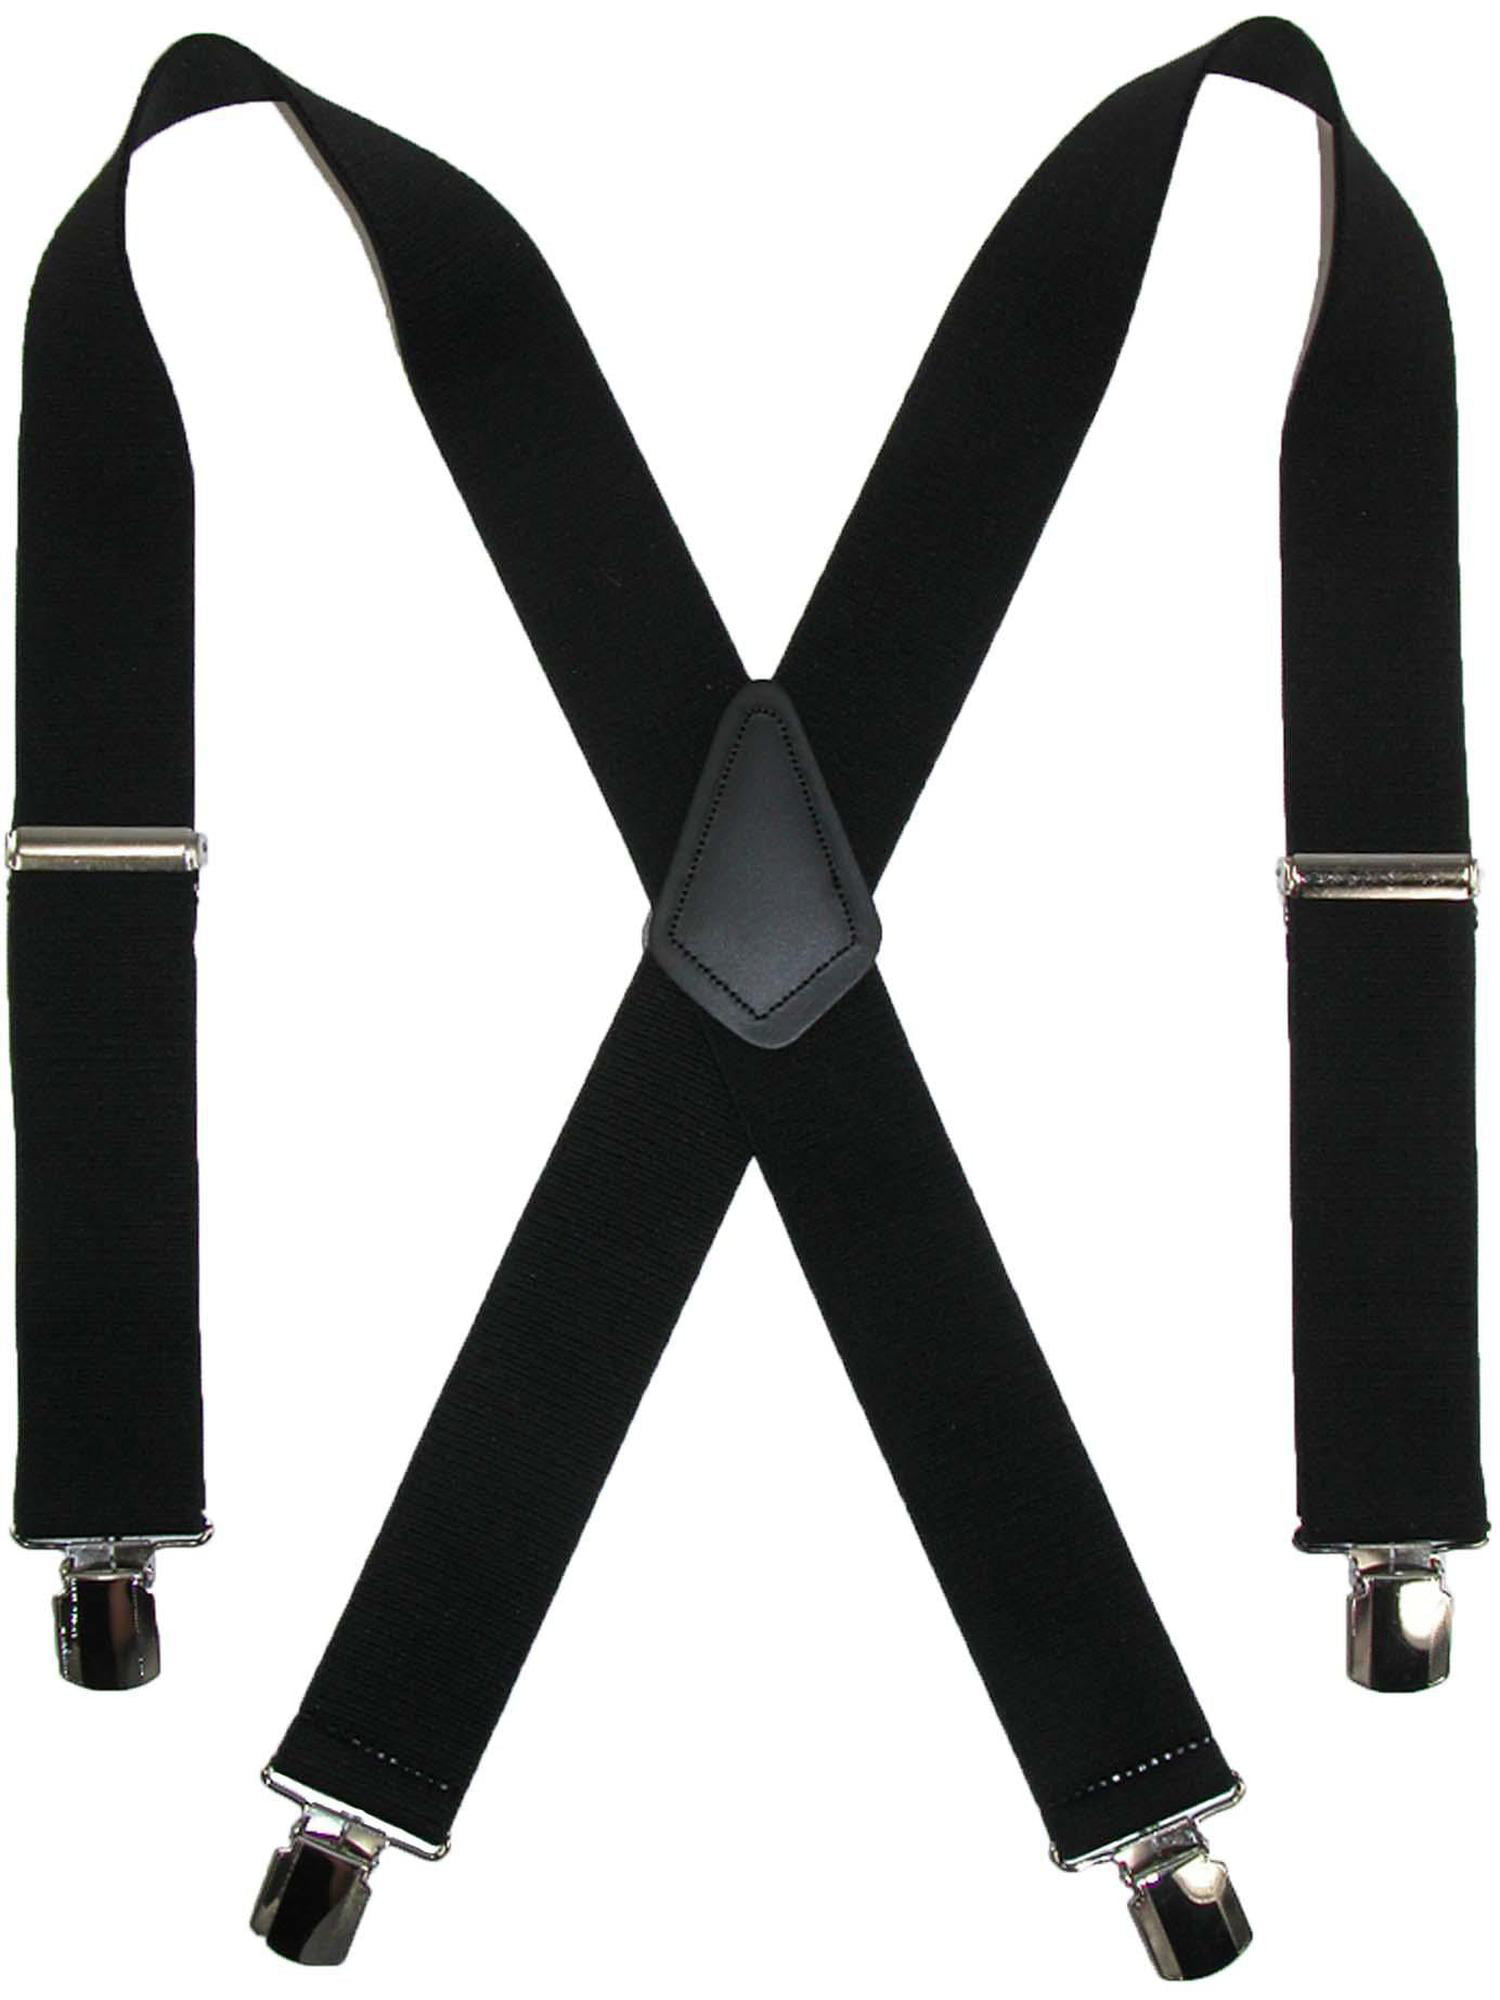 NEW Black with White Line Clip on SUSPENDERS Elastic Adjustable Adult USA SELLER 